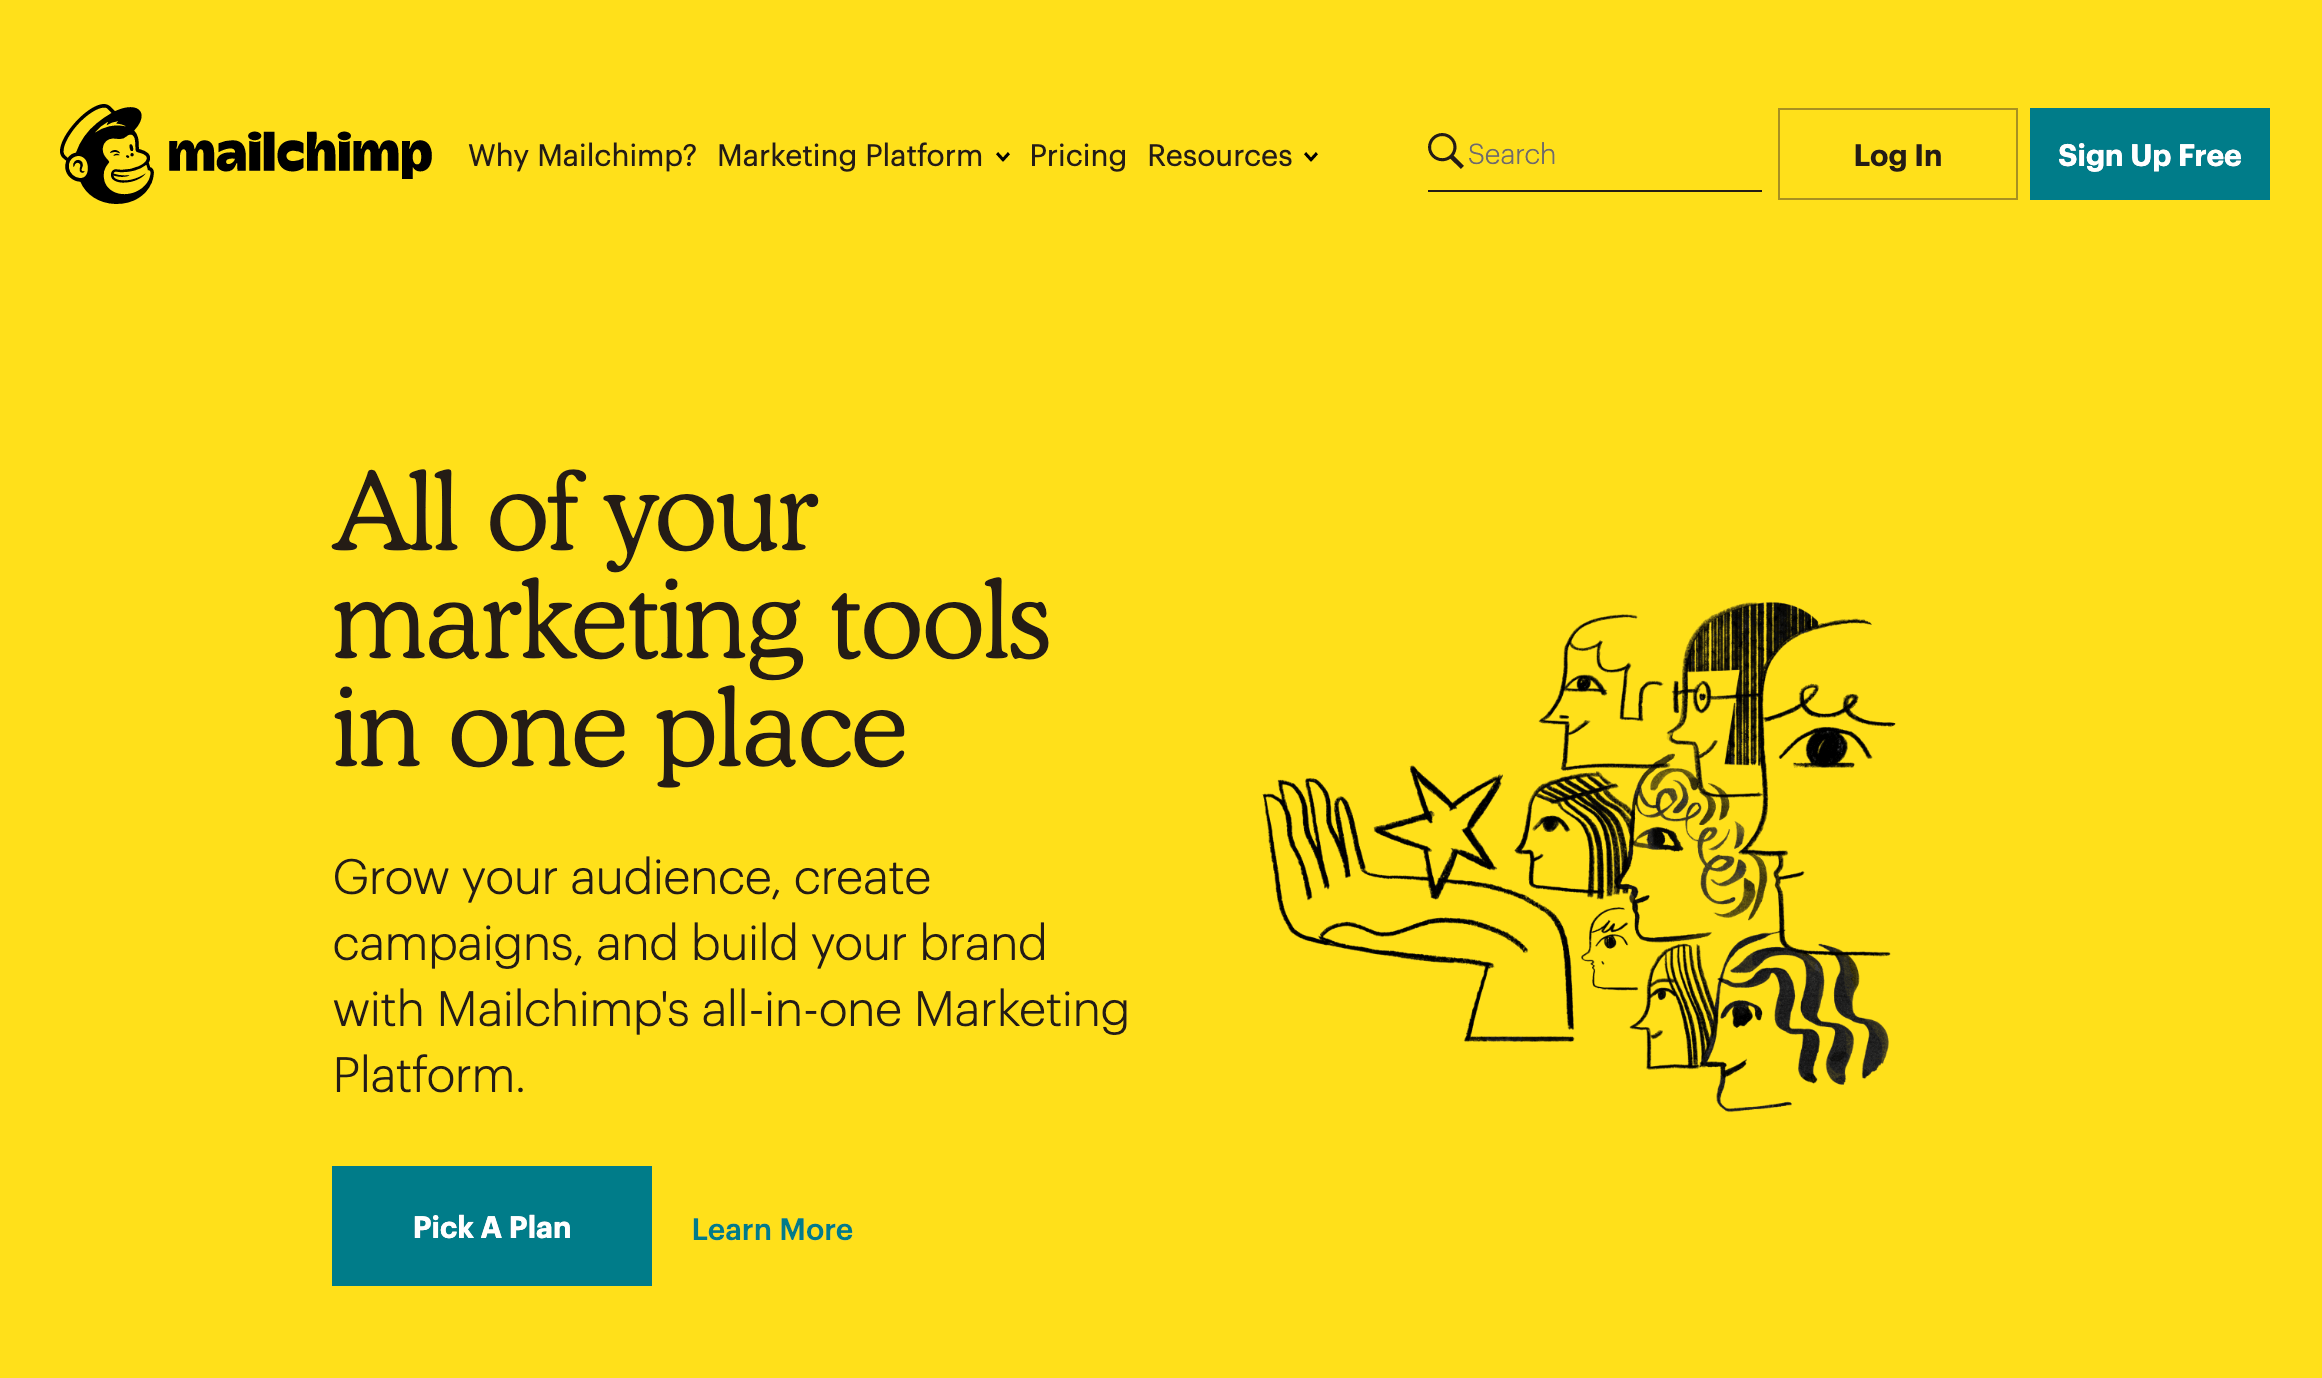 The MailChimp homepage.